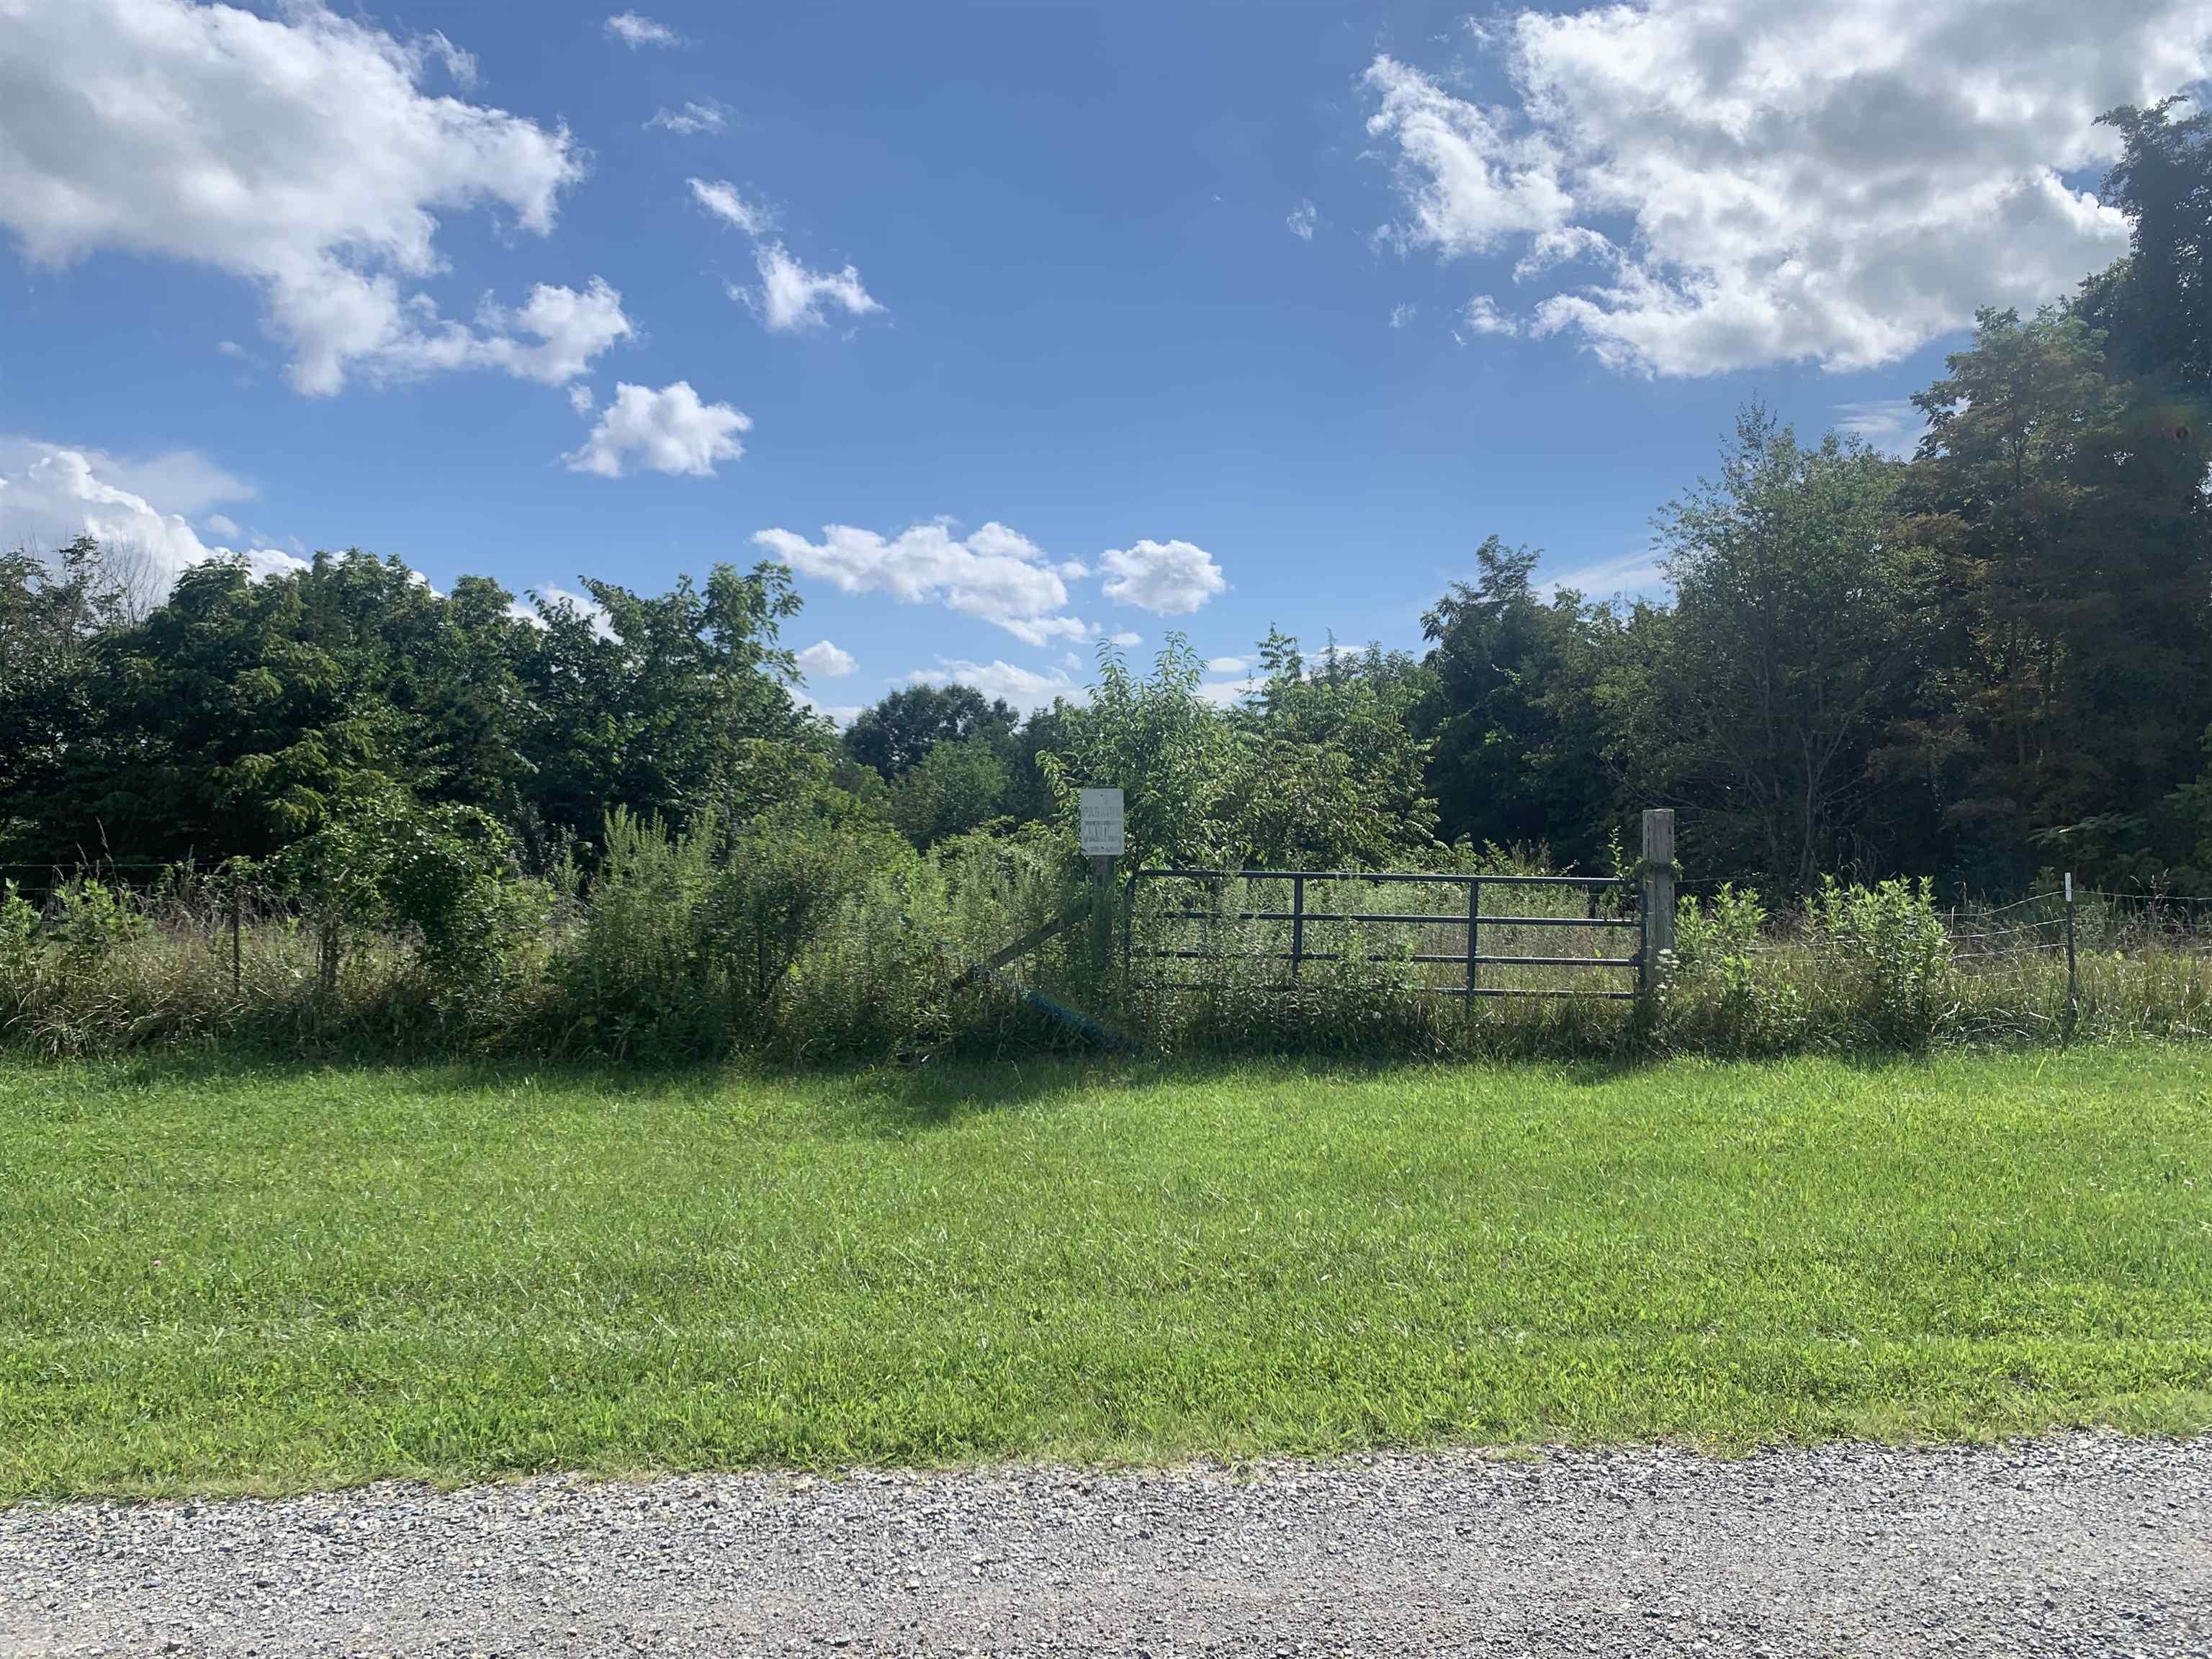 Looking for a country setting to build your new home or a nice piece of land for your horses? This is it! Enjoy the peace and quiet of this 5+ acre lot that is only minutes from town and I-81.